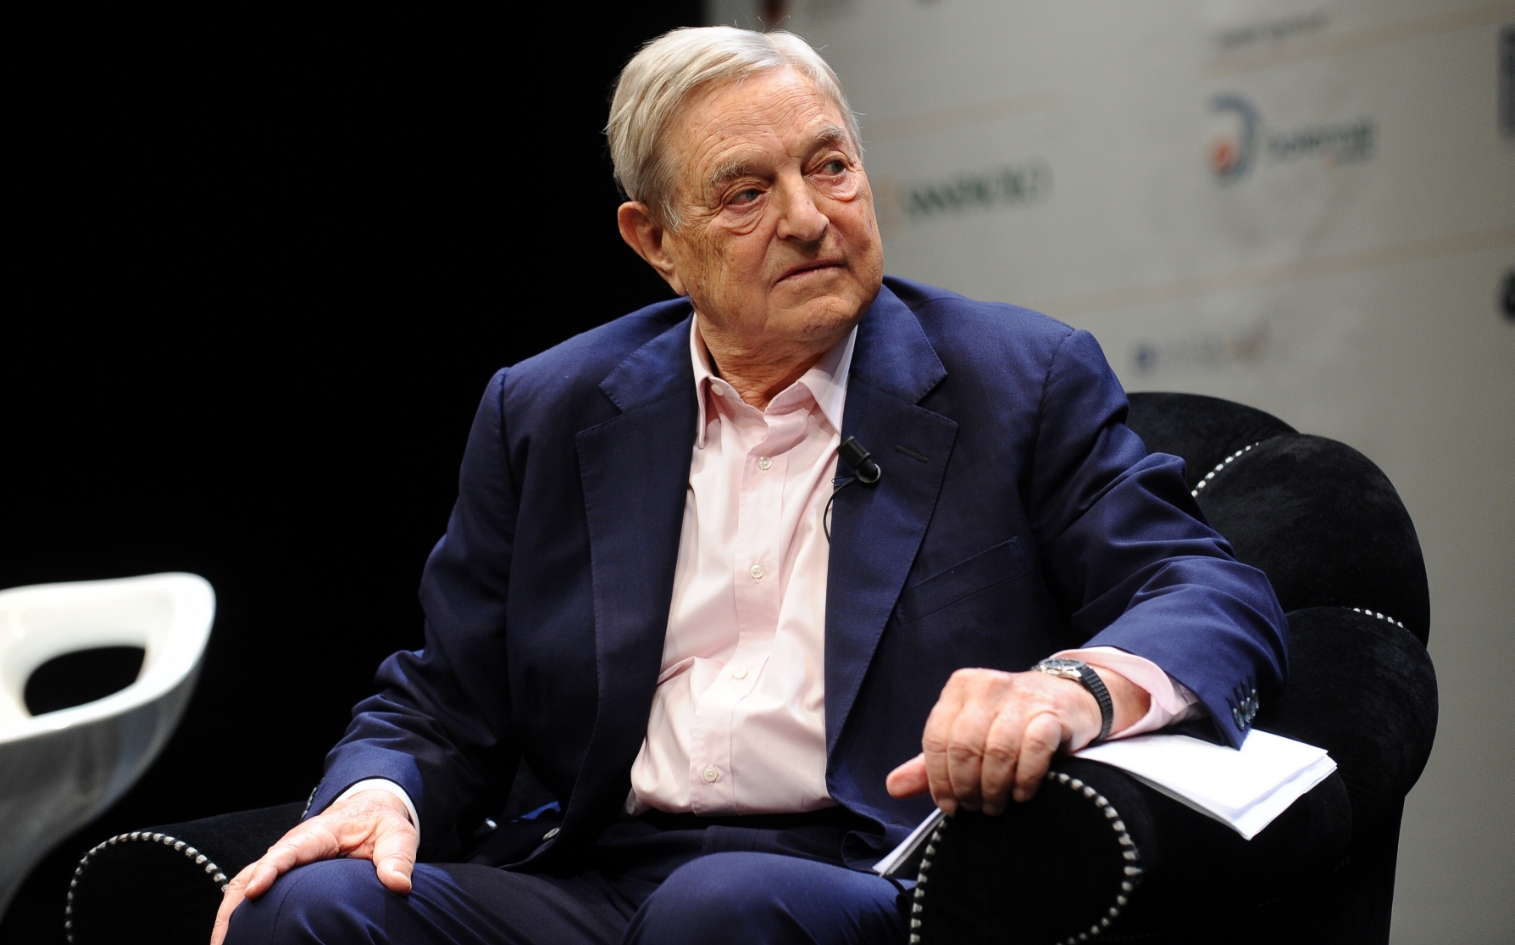 Image: It’s time to lift the veil on George Soros